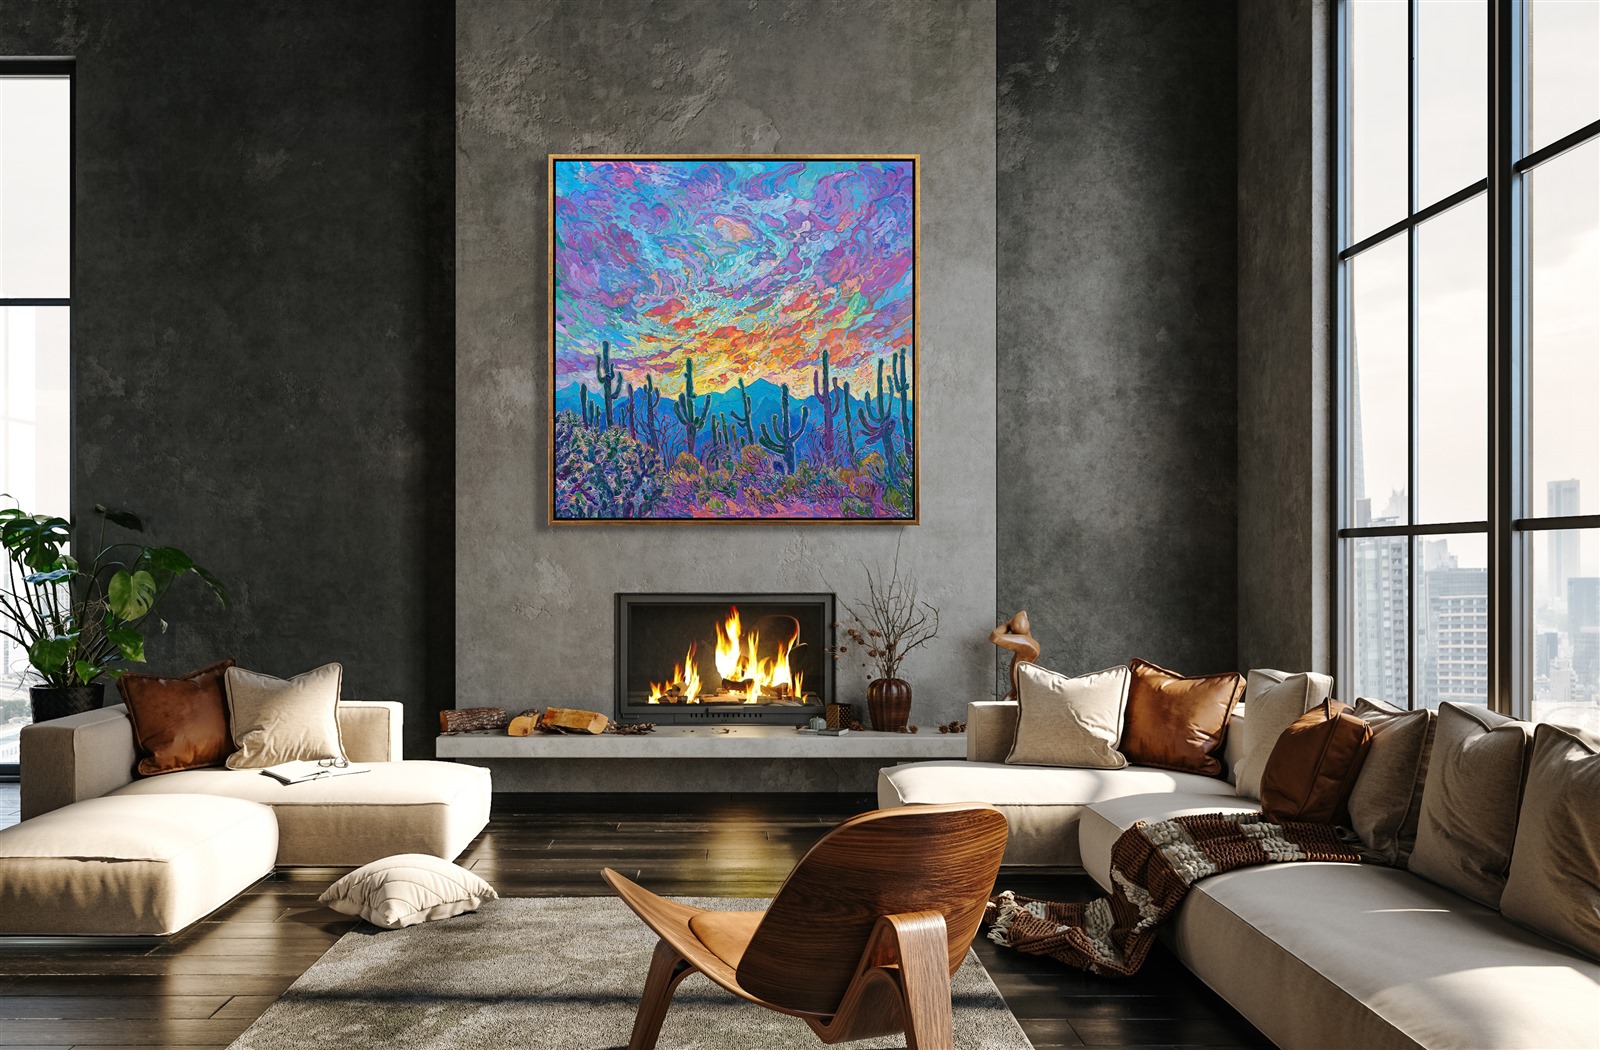 Saguaro at Sunset - Contemporary Impressionism Paintings by Erin Hanson